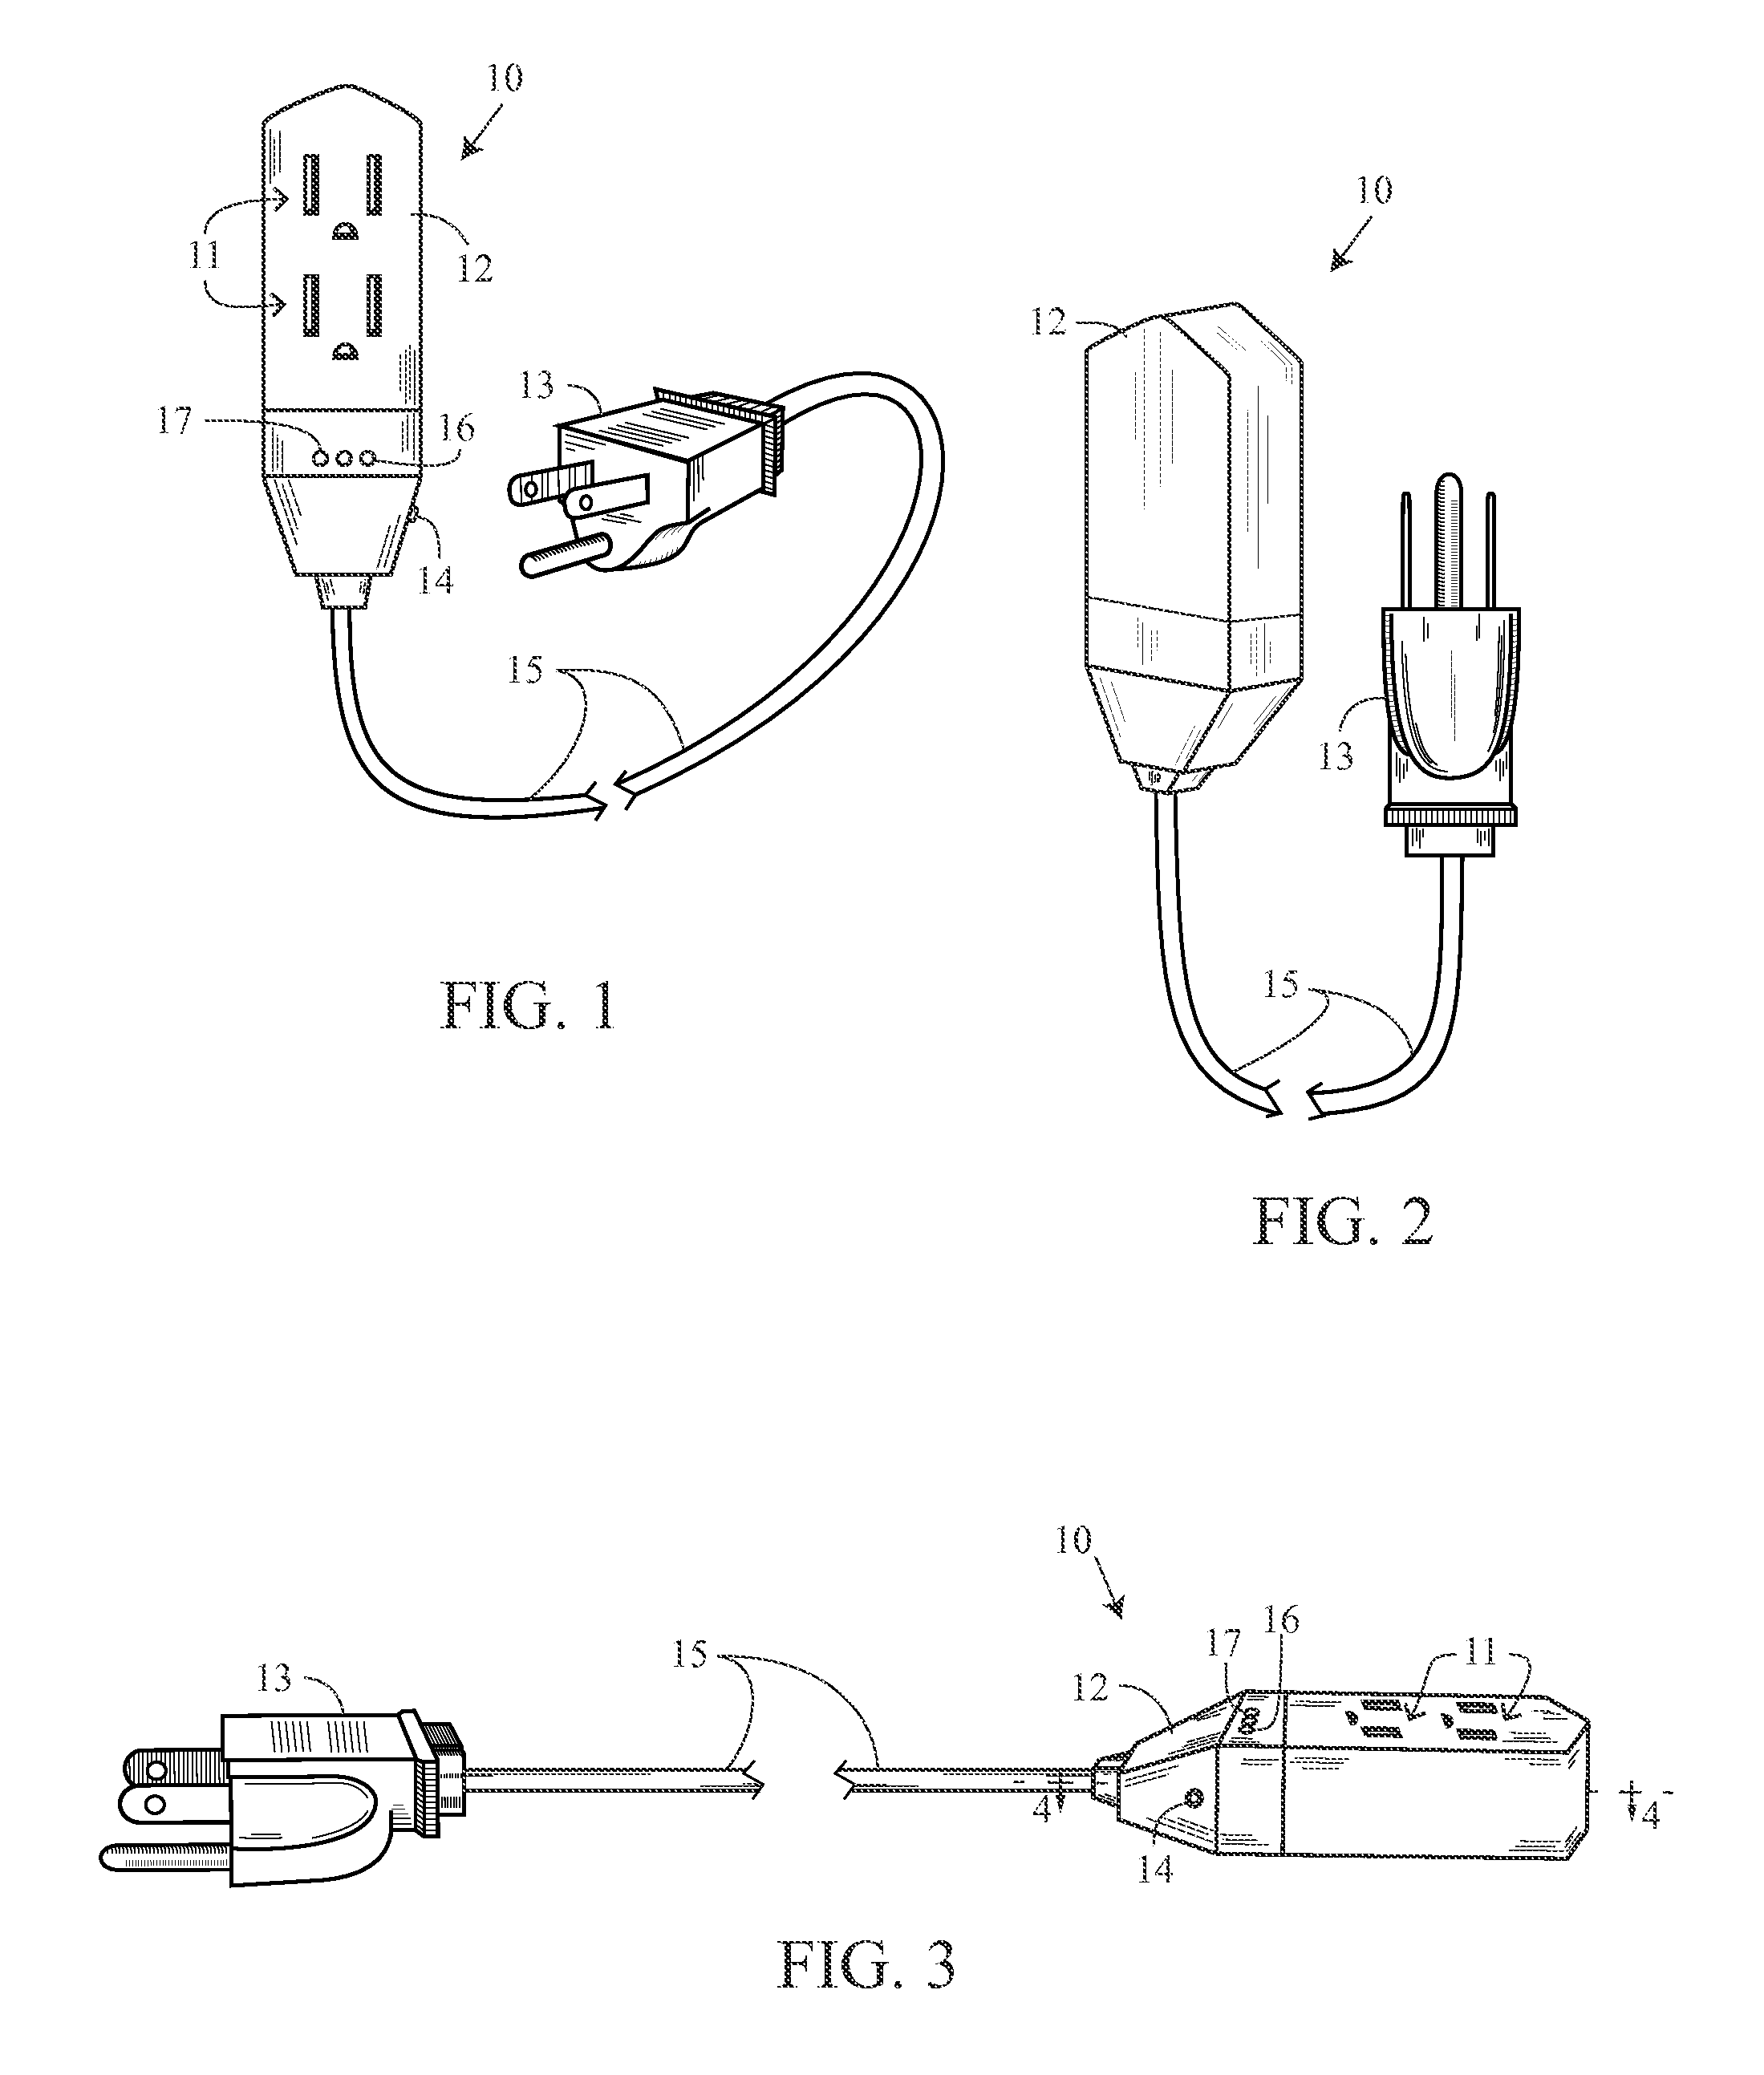 Method and apparatus for controlling power to a device